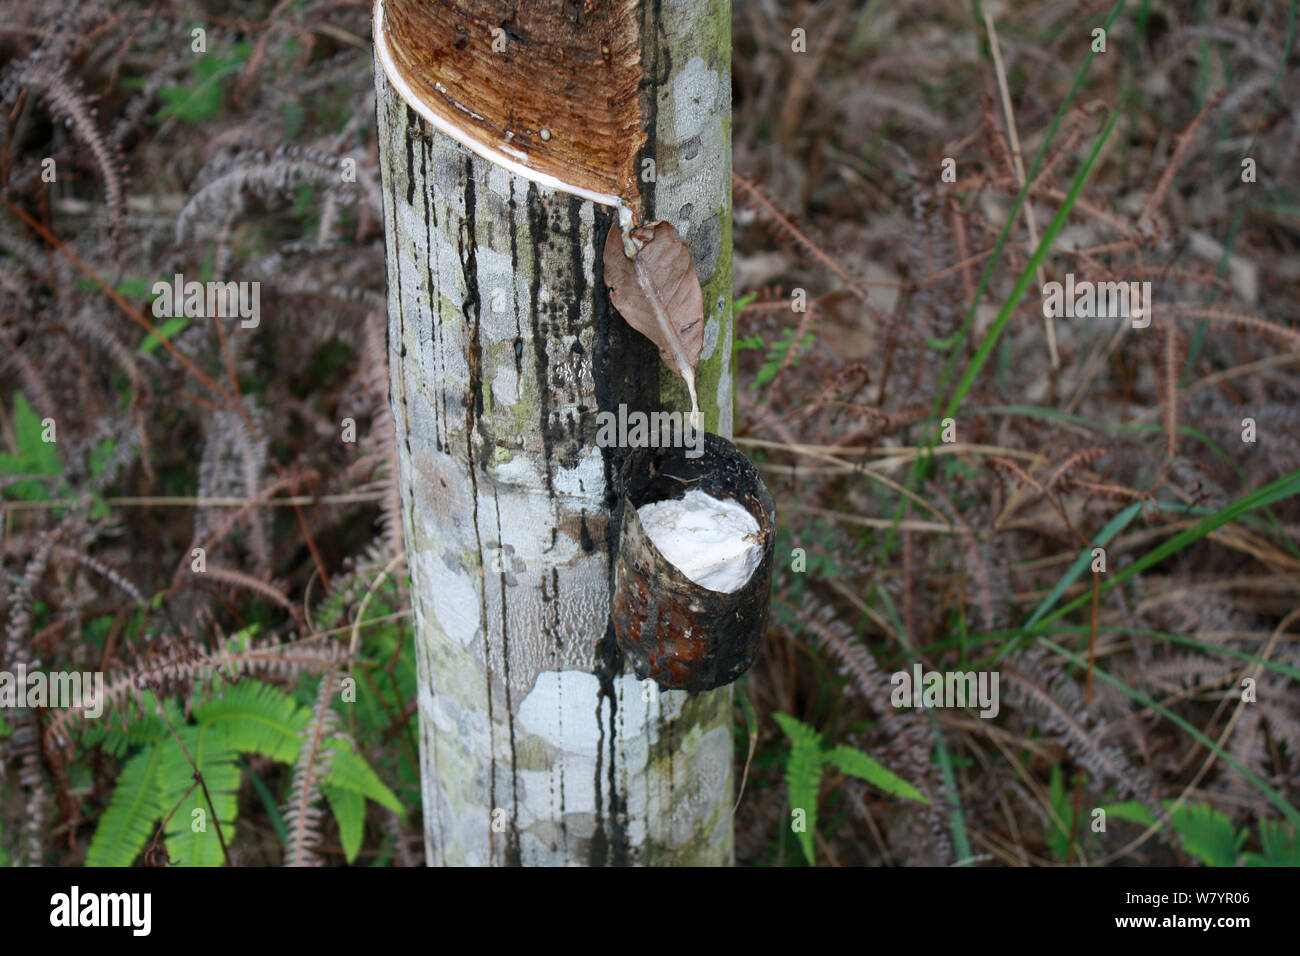 Rubber tapping on Rubber tree (Hevea brasiliensis)  Central Kalimantan, Indonesia Borneo. June 2010. Stock Photo